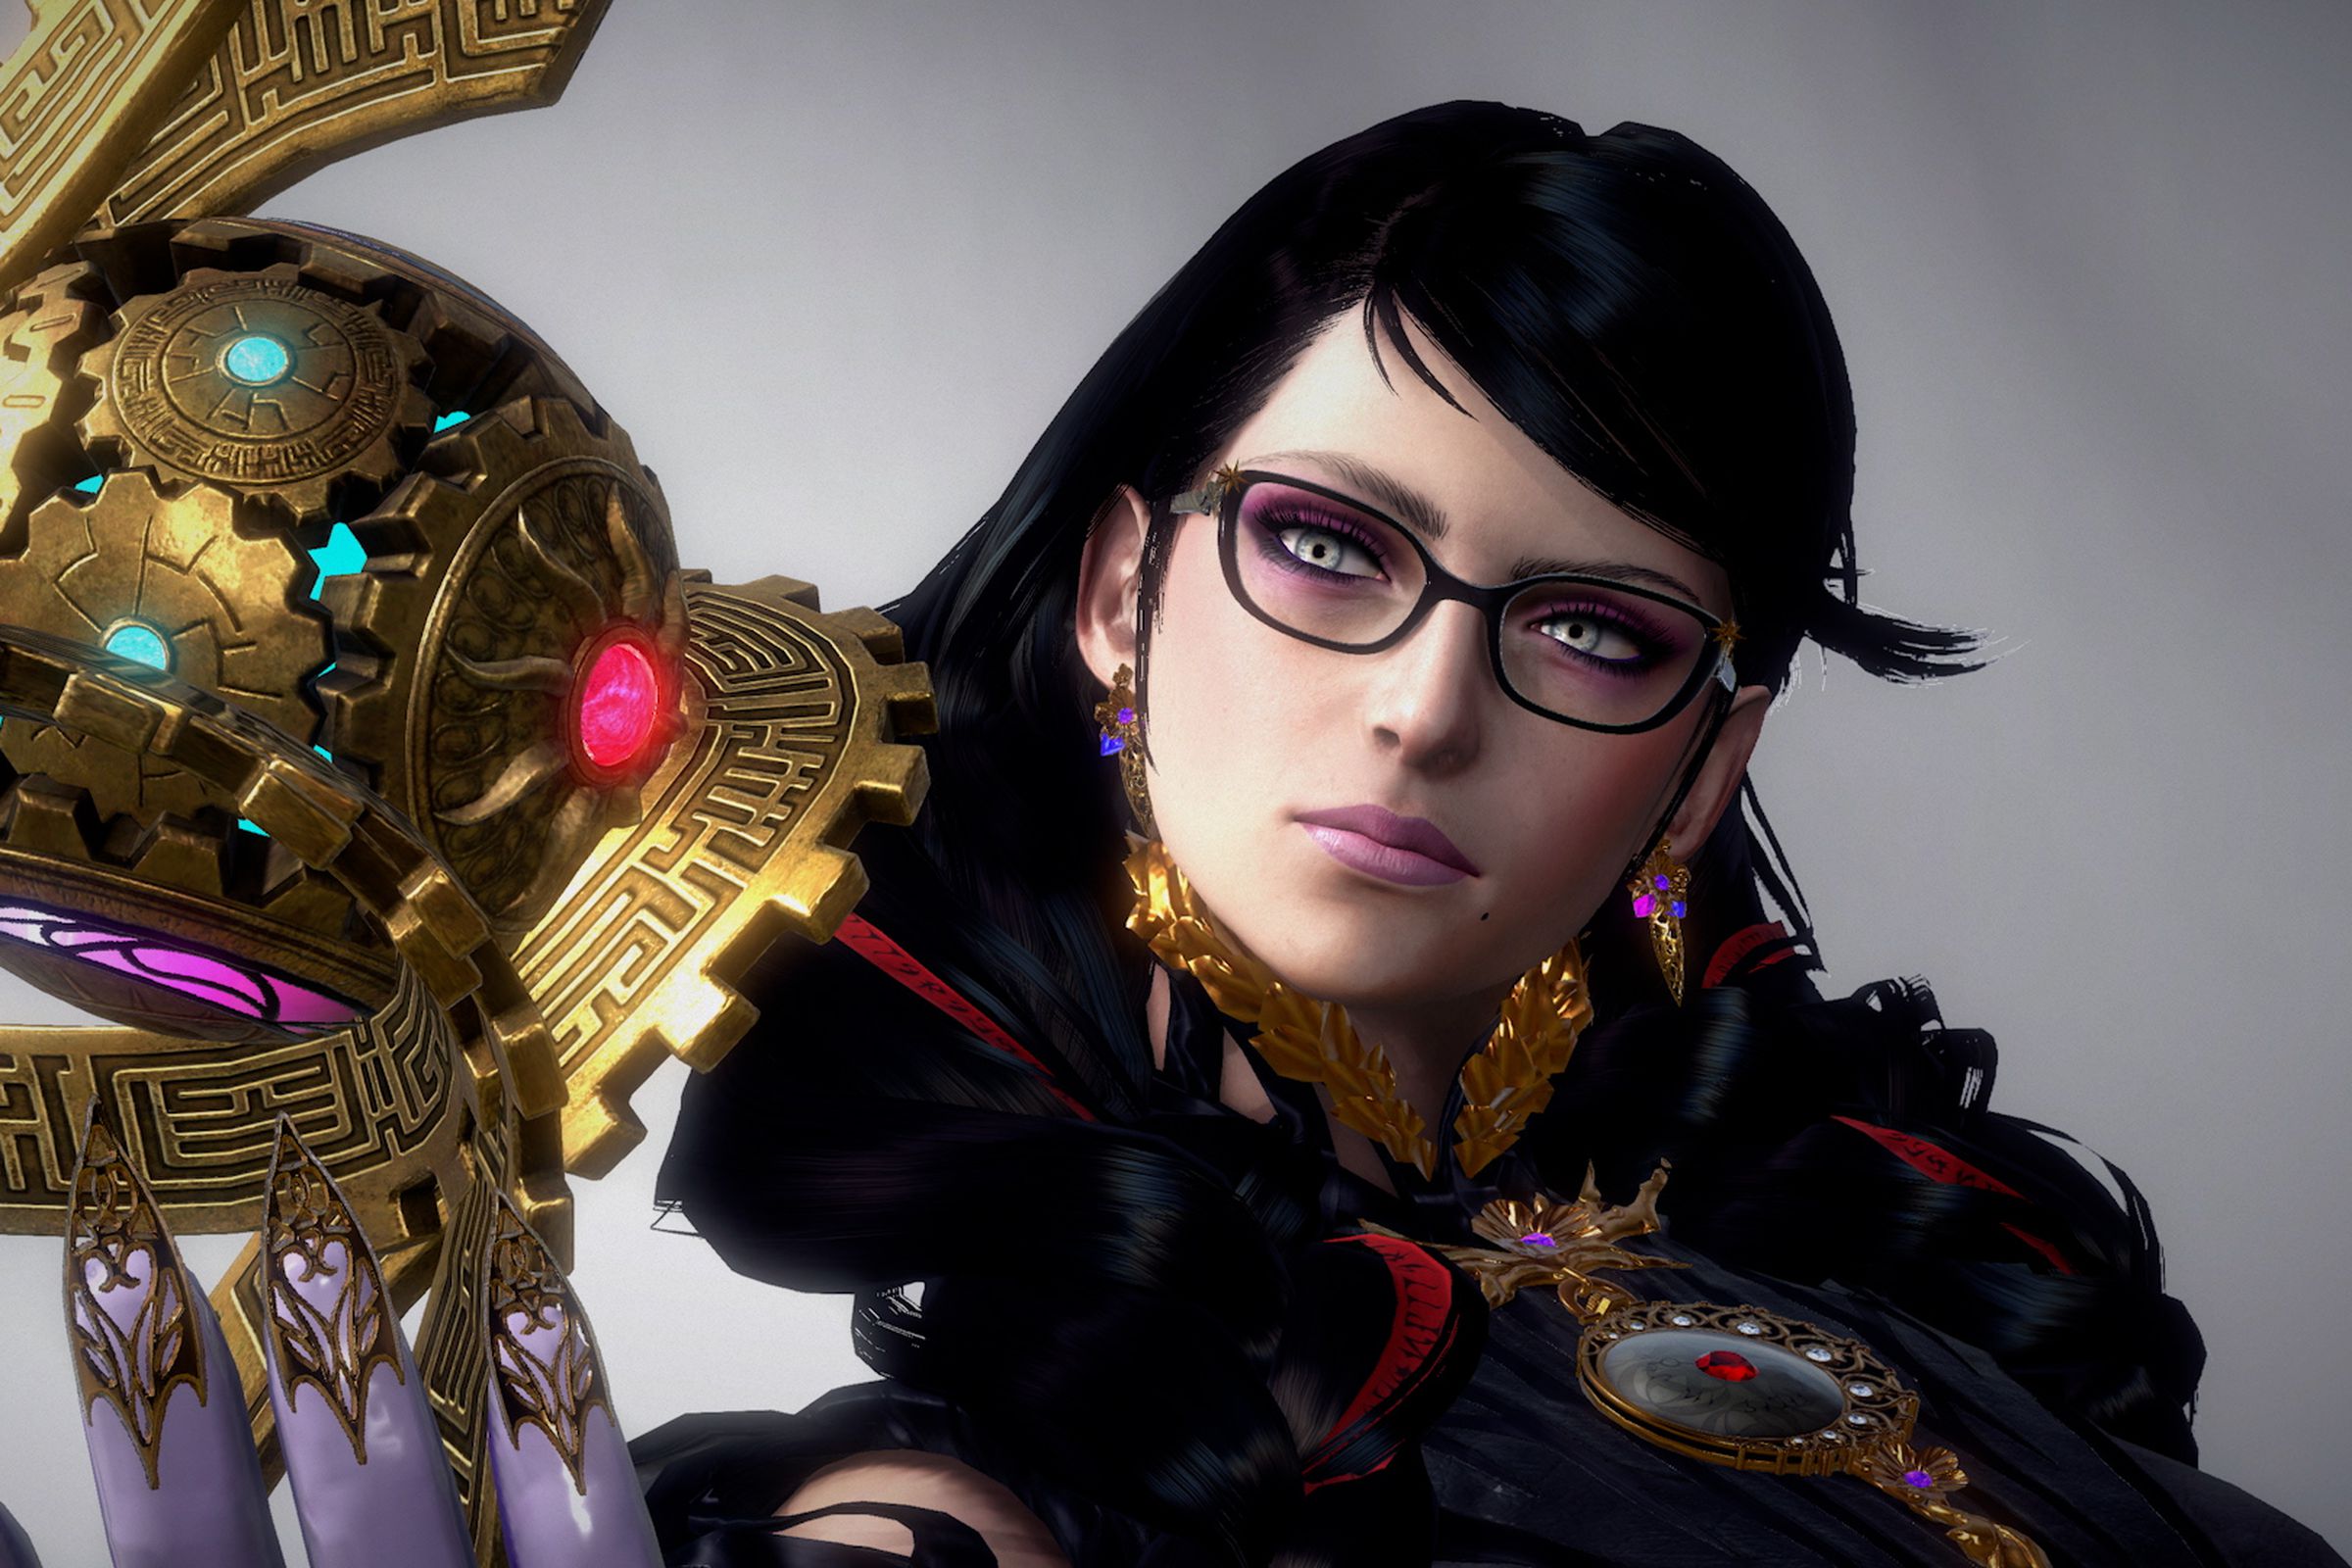 Screenshot from Bayonetta 3 featuring the titular heroine with long curled black hair and black glasses holding up a golden orb with colorful gems and gears inside it